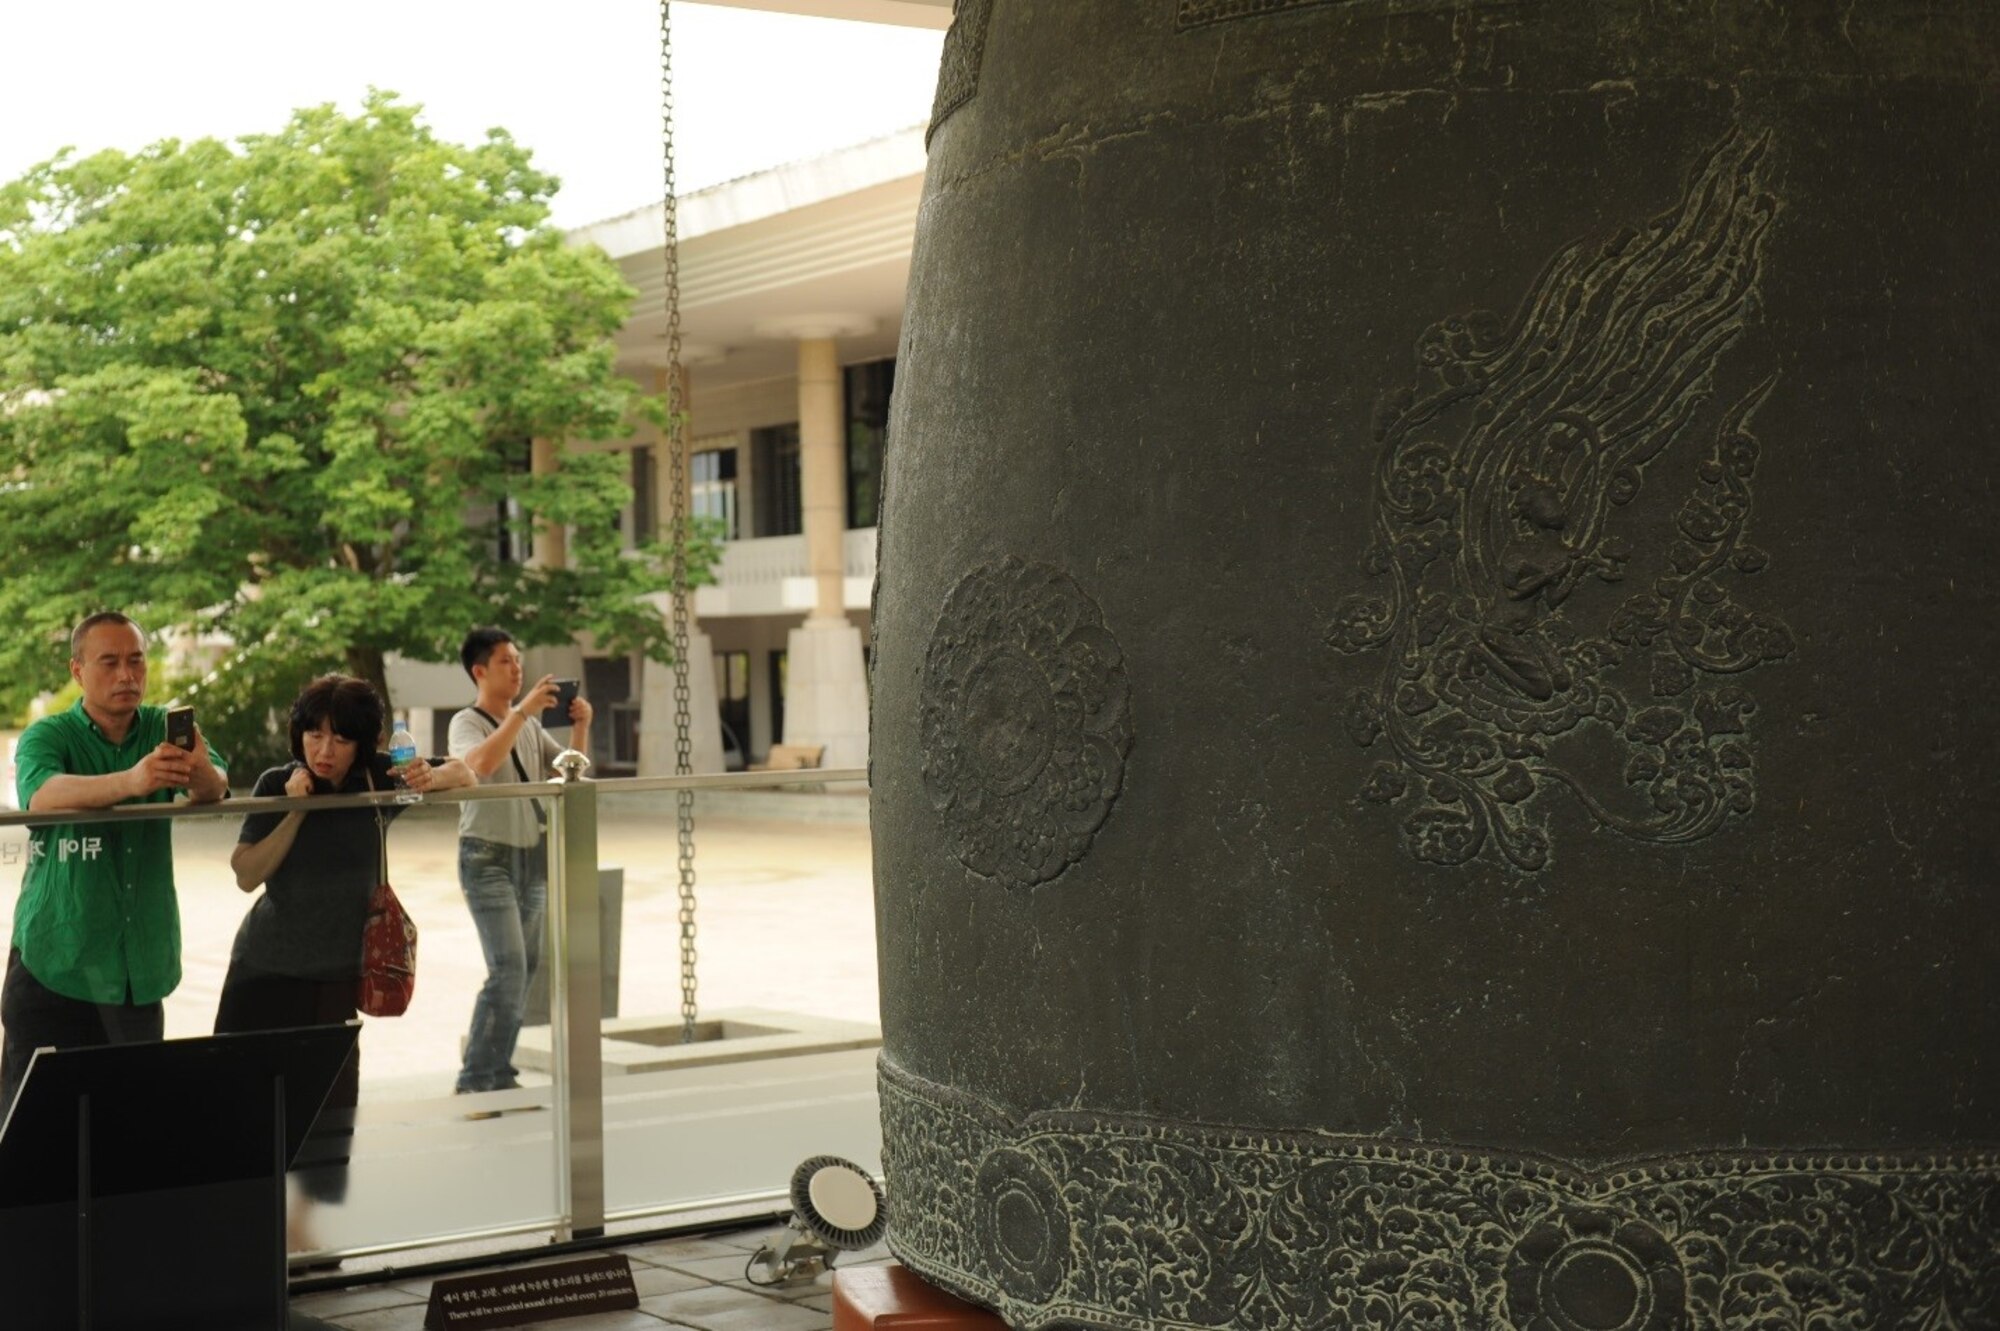 Visitors of the Gyeongju National Museum read about the Divine Bell of King Seongdeok in Gyeongju, Republic of Korea, July 18, 2017.  The bell was completed in 771 and is still operational, ringing out the hour every day. Nearly 100 United States Forces Korea members were invited by the Ministry of Patriots and Veterans Affairs to tour this location and other historic sites across the ROK as part of an initiative to give U.S. personnel a better understanding of Korean culture and patriotism. (U.S. Air Force photo by 1st Lt. Lauren Linscott/Released)